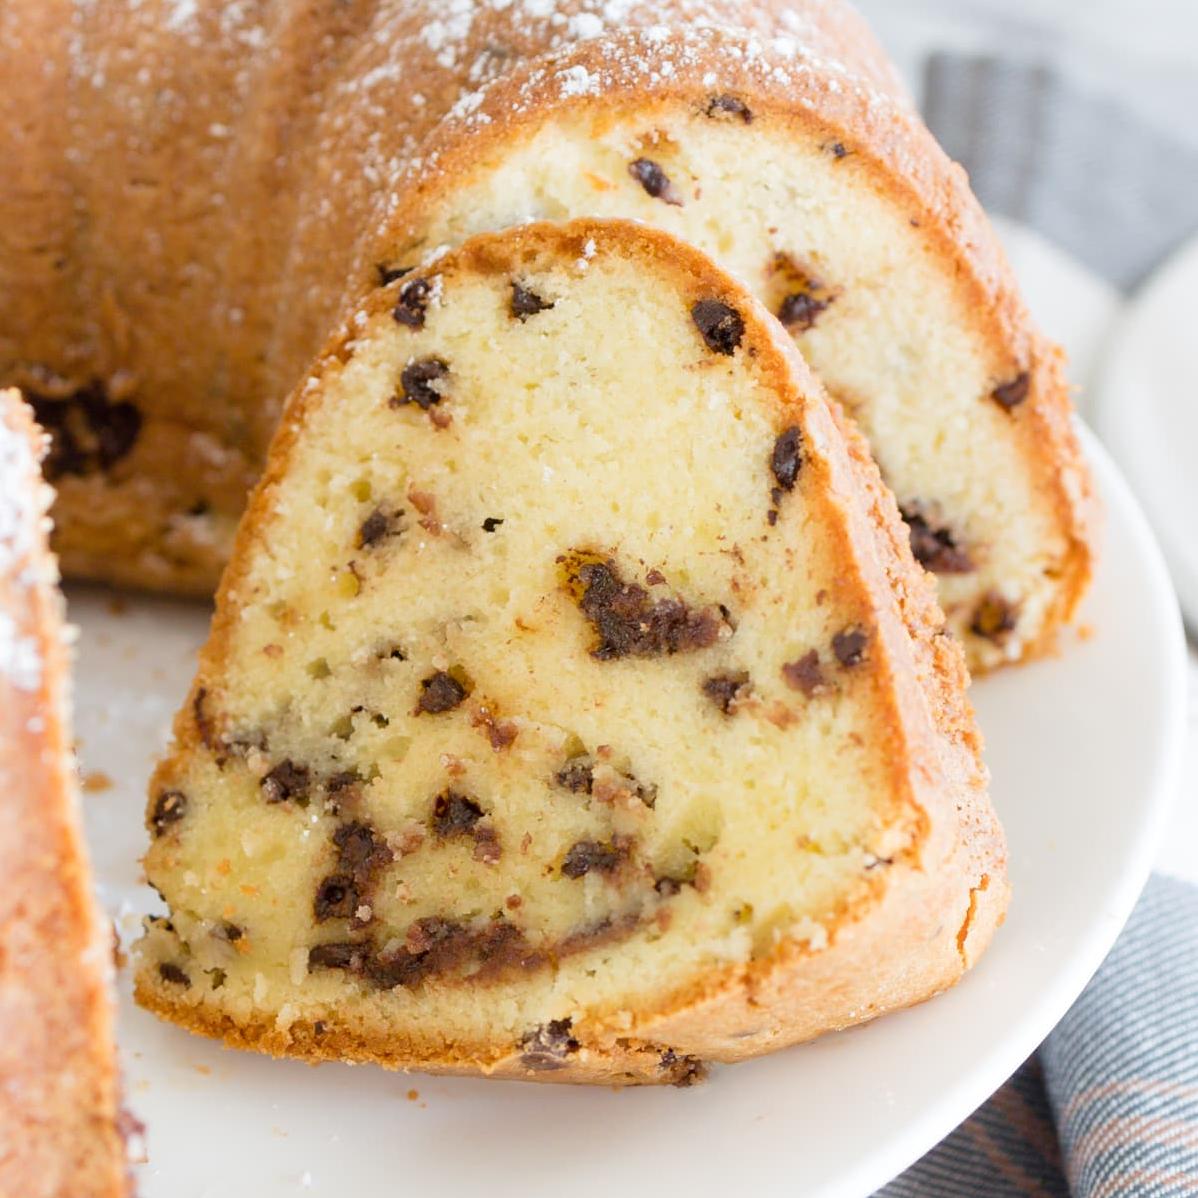  The chocolate chips add a little surprise in every bite of this traditional pound cake.